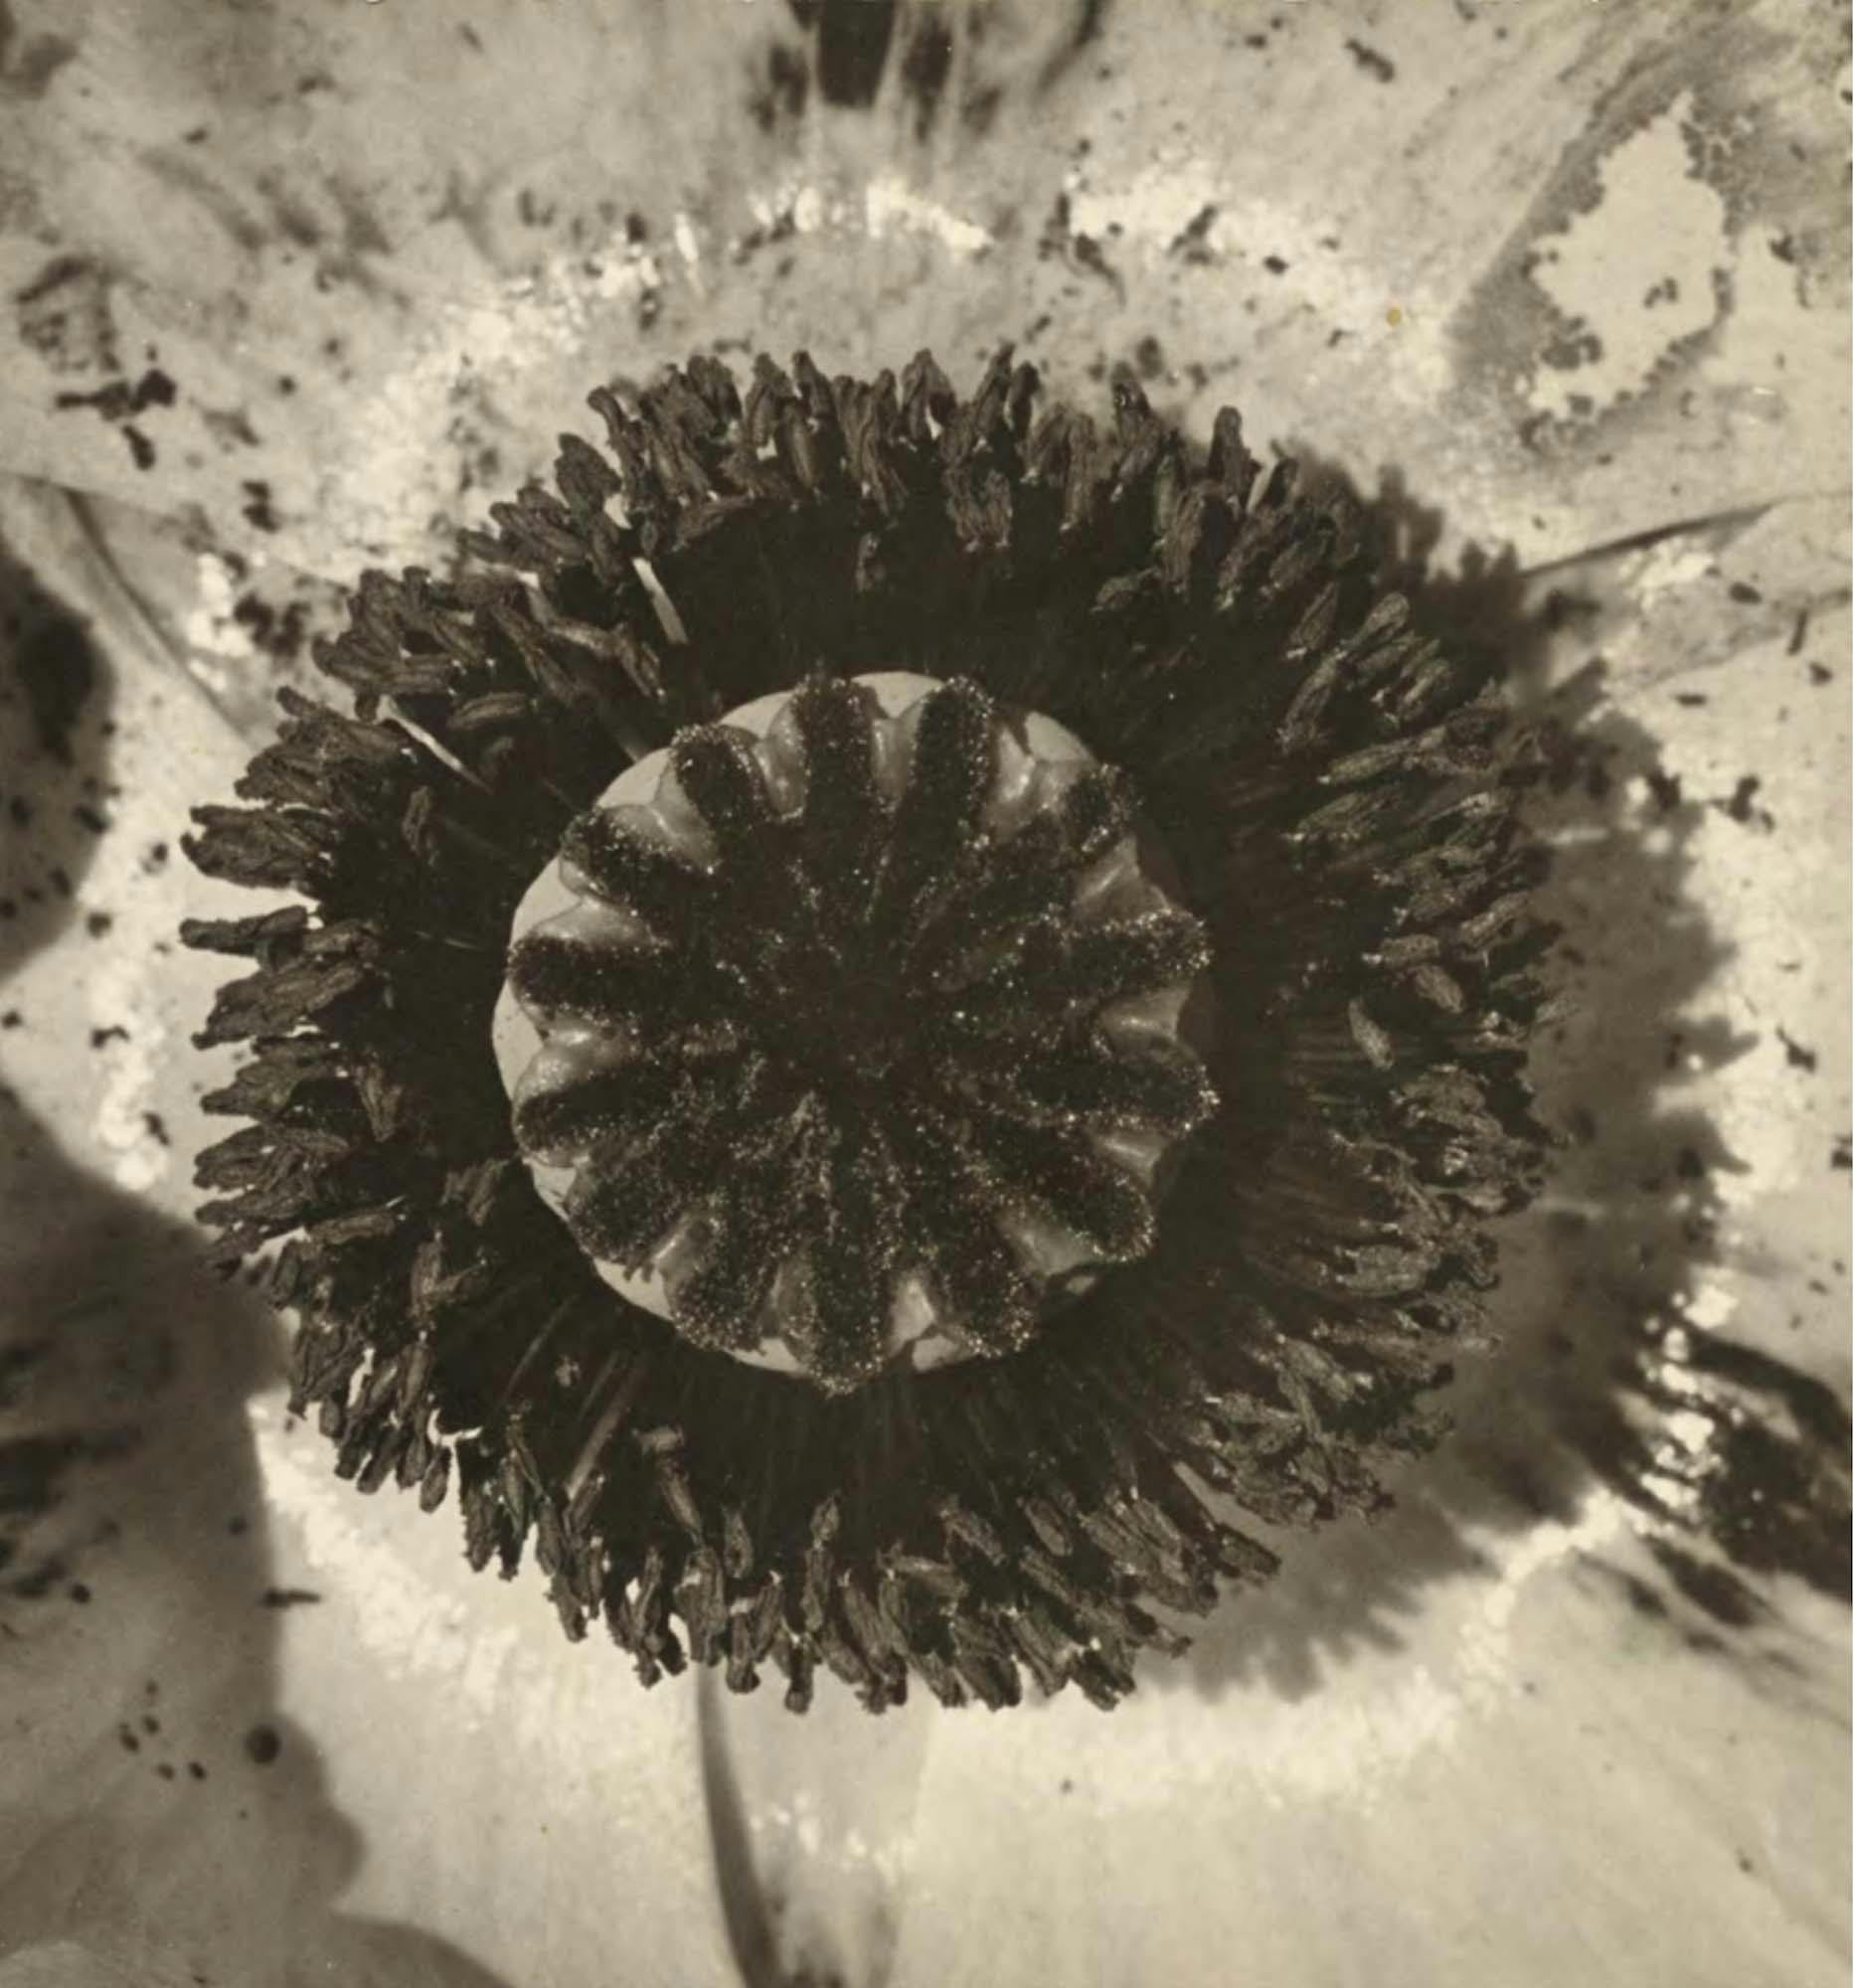 _Flower Close-up_
1950s
Gelatin silver print
10 1/8 x 9 1/2 in. (25.7 x 24.1 cm)
The J. Paul Getty Museum, Los Angeles (98.XM.19.2)
 – The Richard Pousette-Dart Foundation